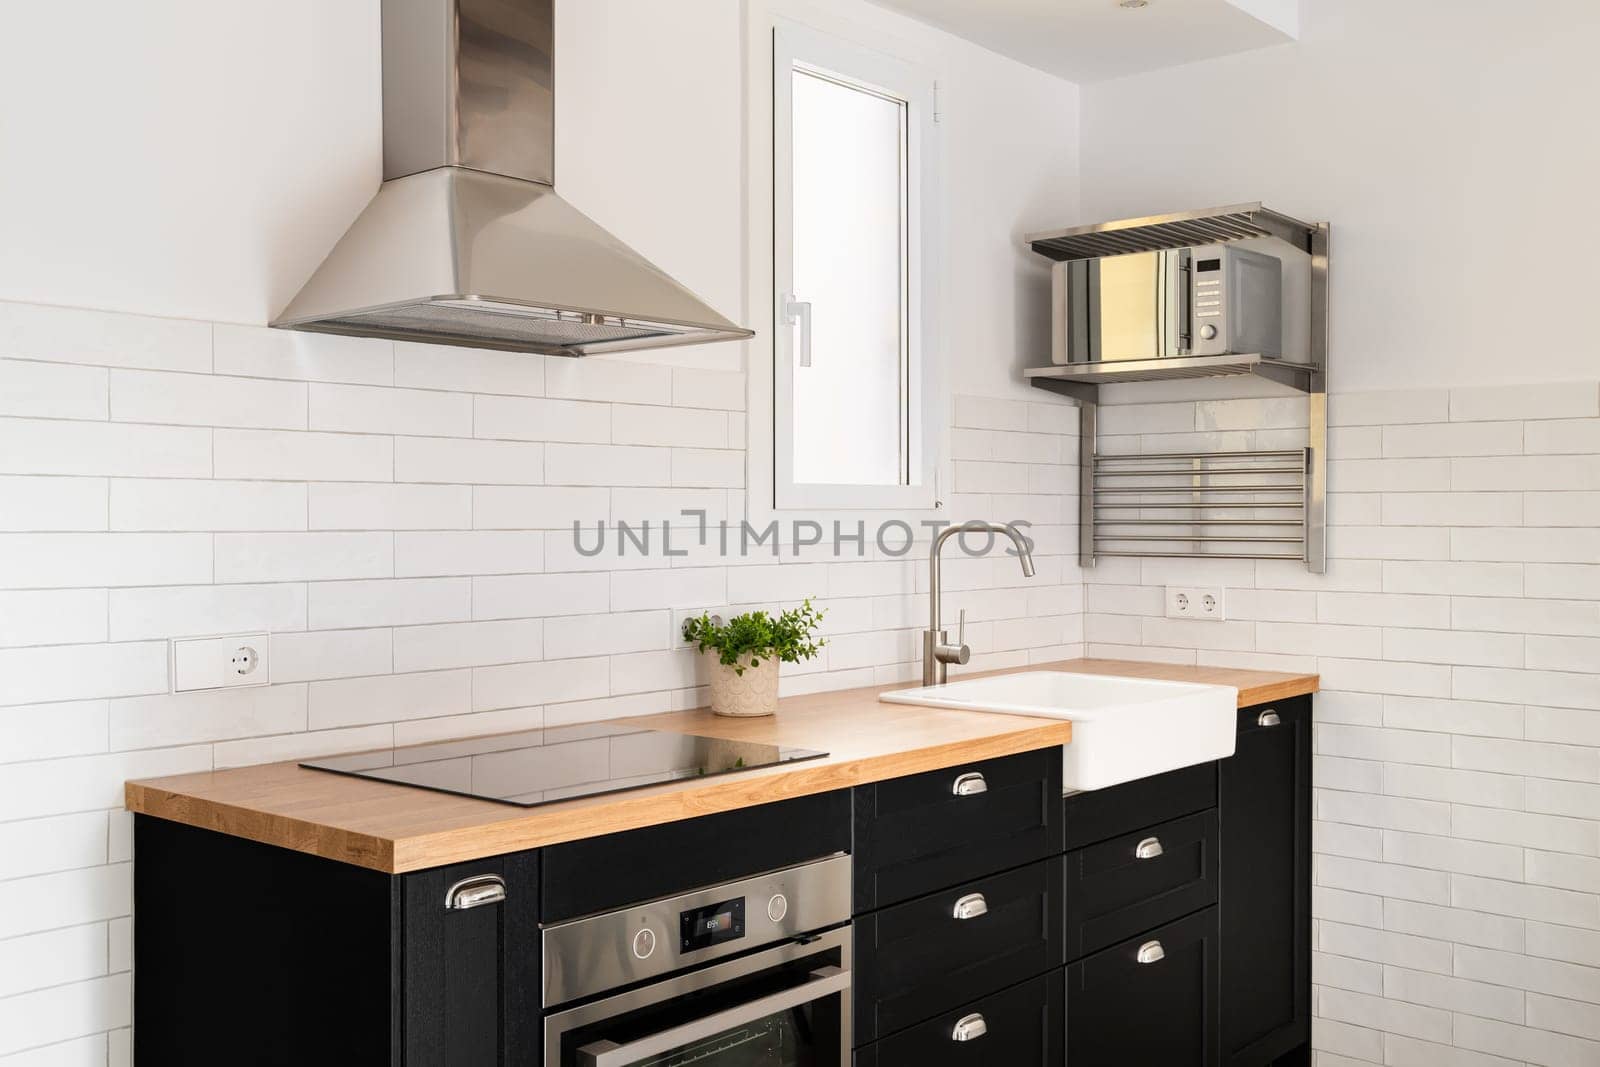 Kitchen island with convection hob and oven with black drawers and wood panel and sink with window and extractor hood against white brick wall. Concept of modern renovation in a new apartment by apavlin